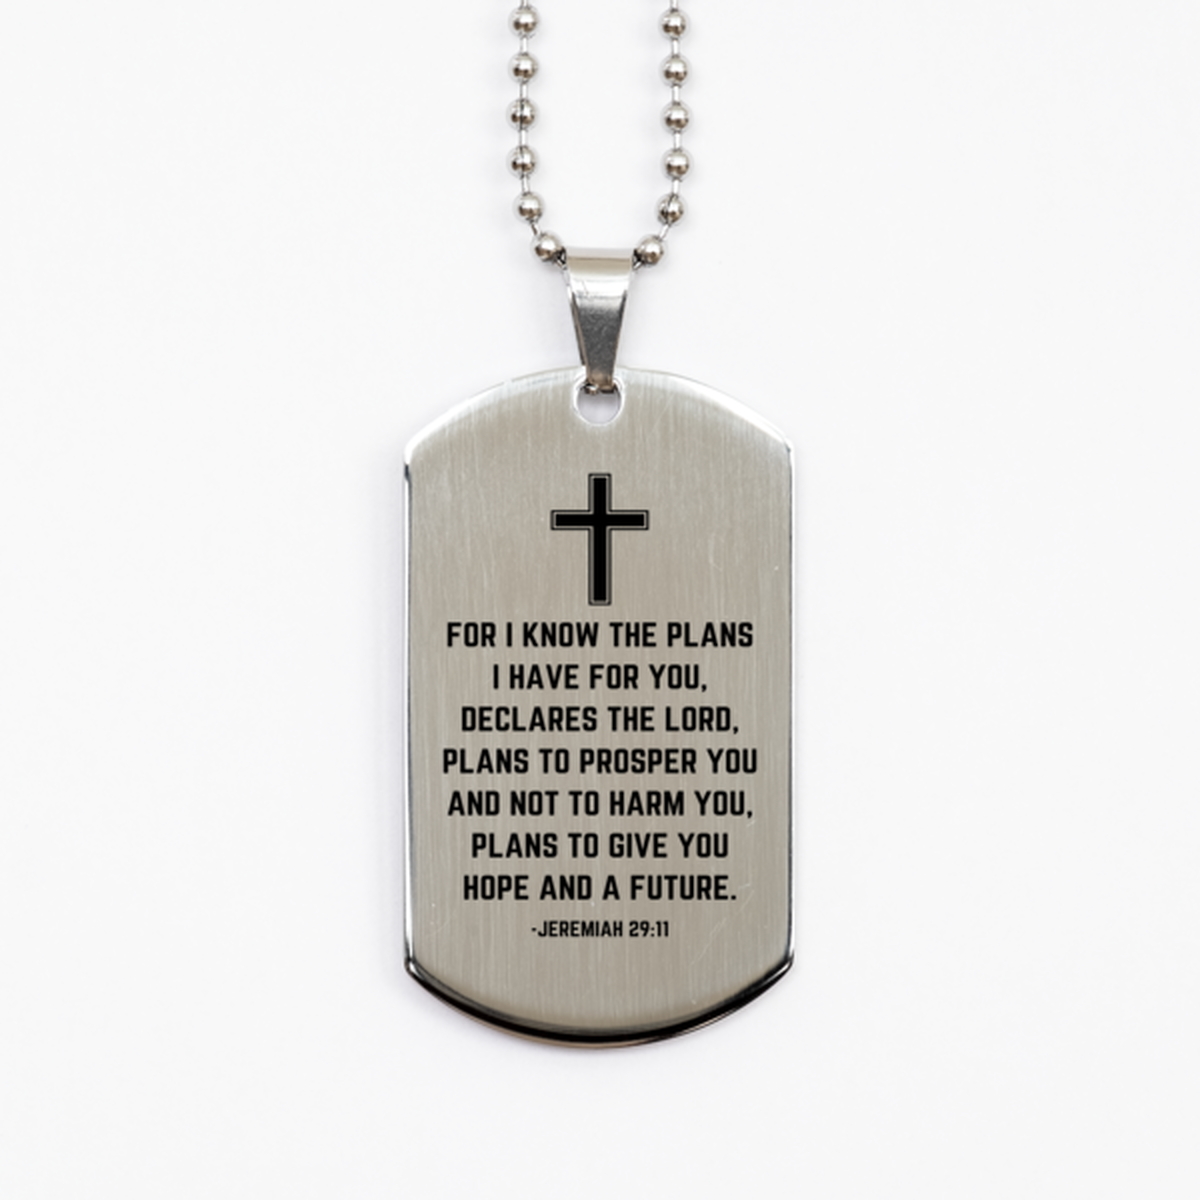 Baptism Gifts For Teenage Boys Girls, Christian Bible Verse Silver Dog Tag, For I know the plans, Confirmation Gifts, Bible Verse Necklace for Son, Godson, Grandson, Nephew